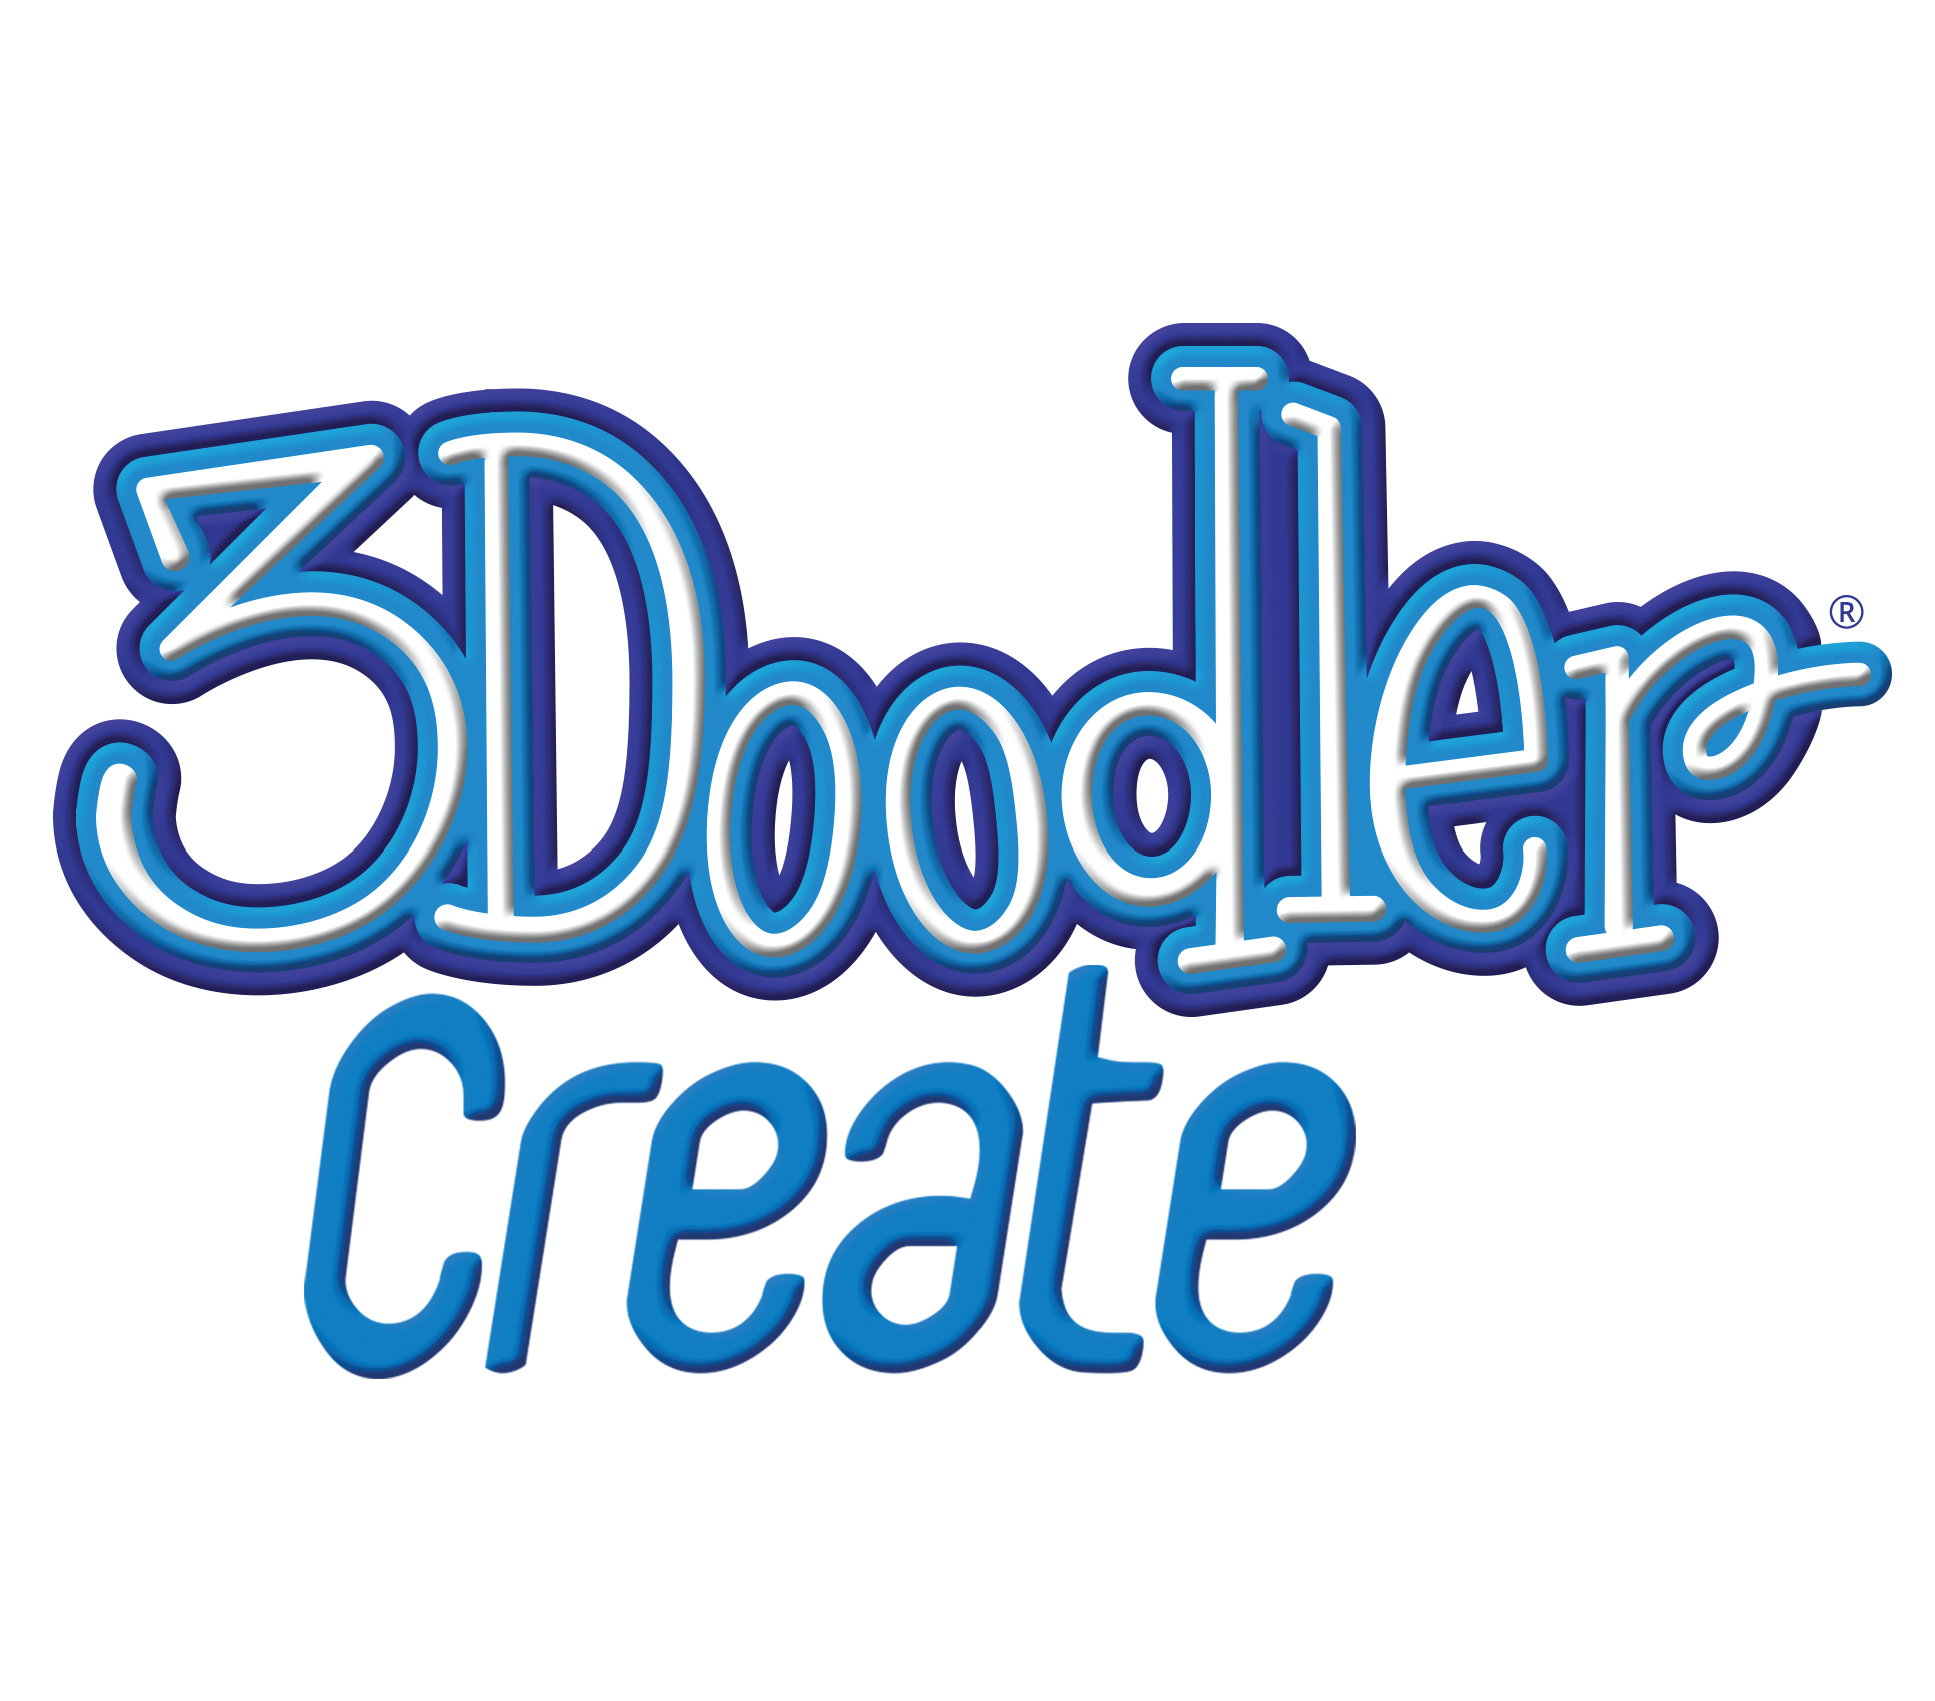 How Making Creativity Count Lead to 1 Million Units Sold – The 3Doodler Story